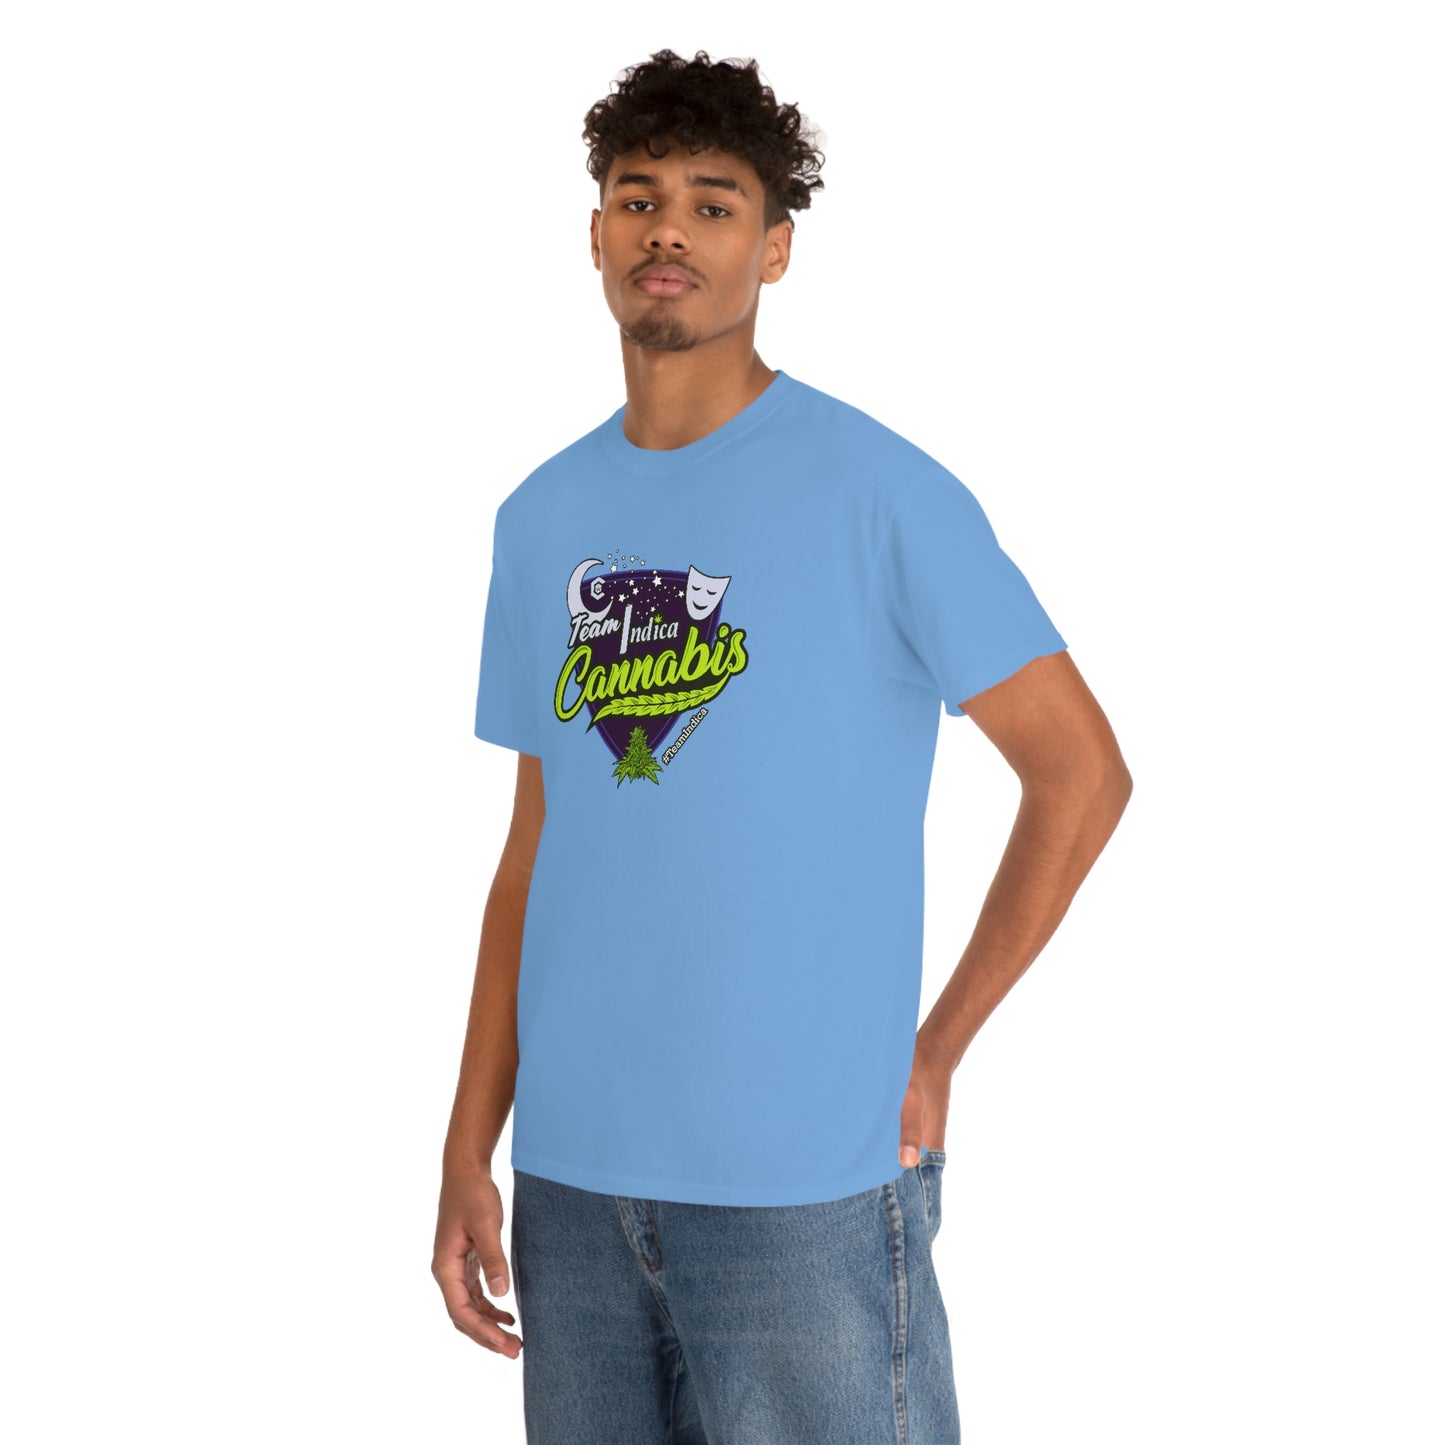 a man wearing a Team Indica Cannabis T-Shirt with a green and purple logo.